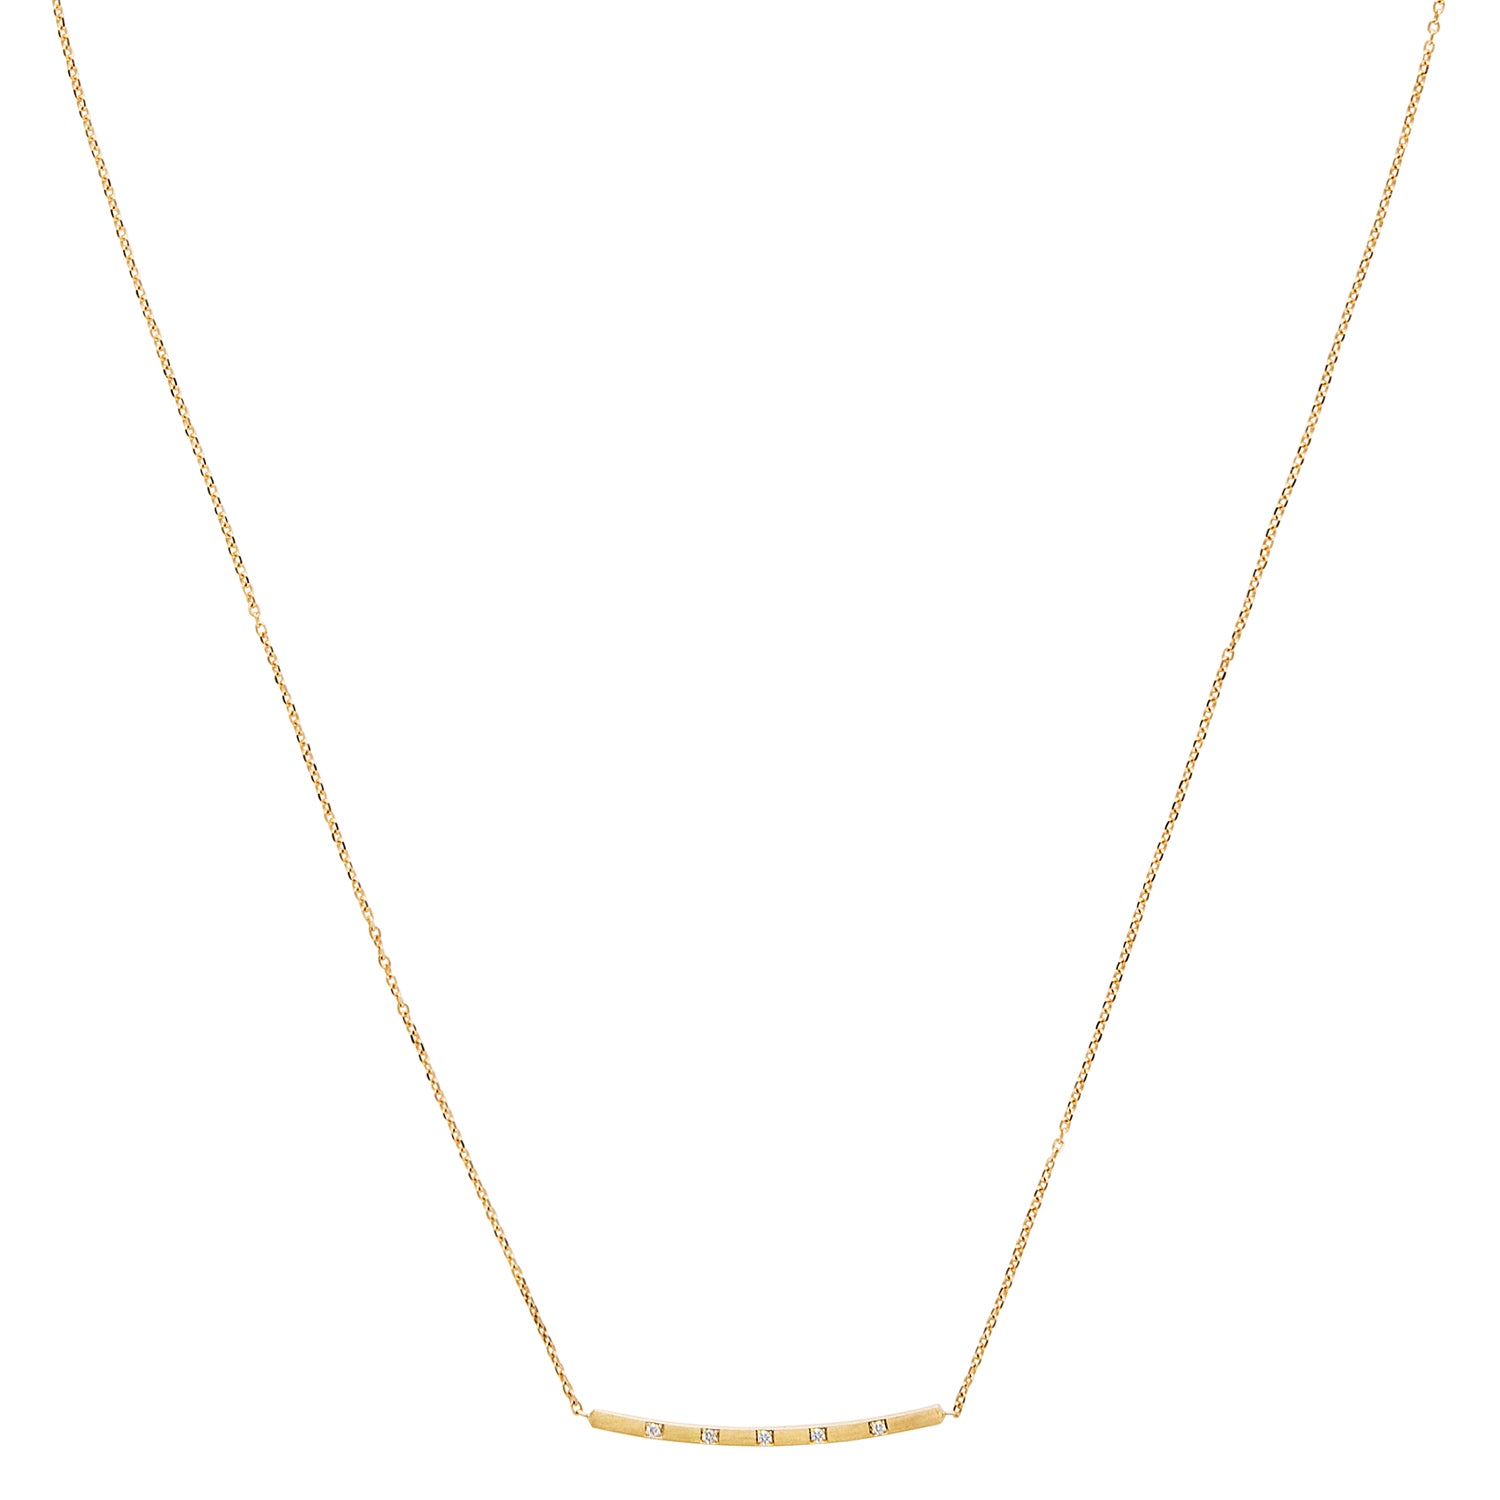 18ct yellow gold fine chain necklace with brushed curved bar set with 5 Diamonds